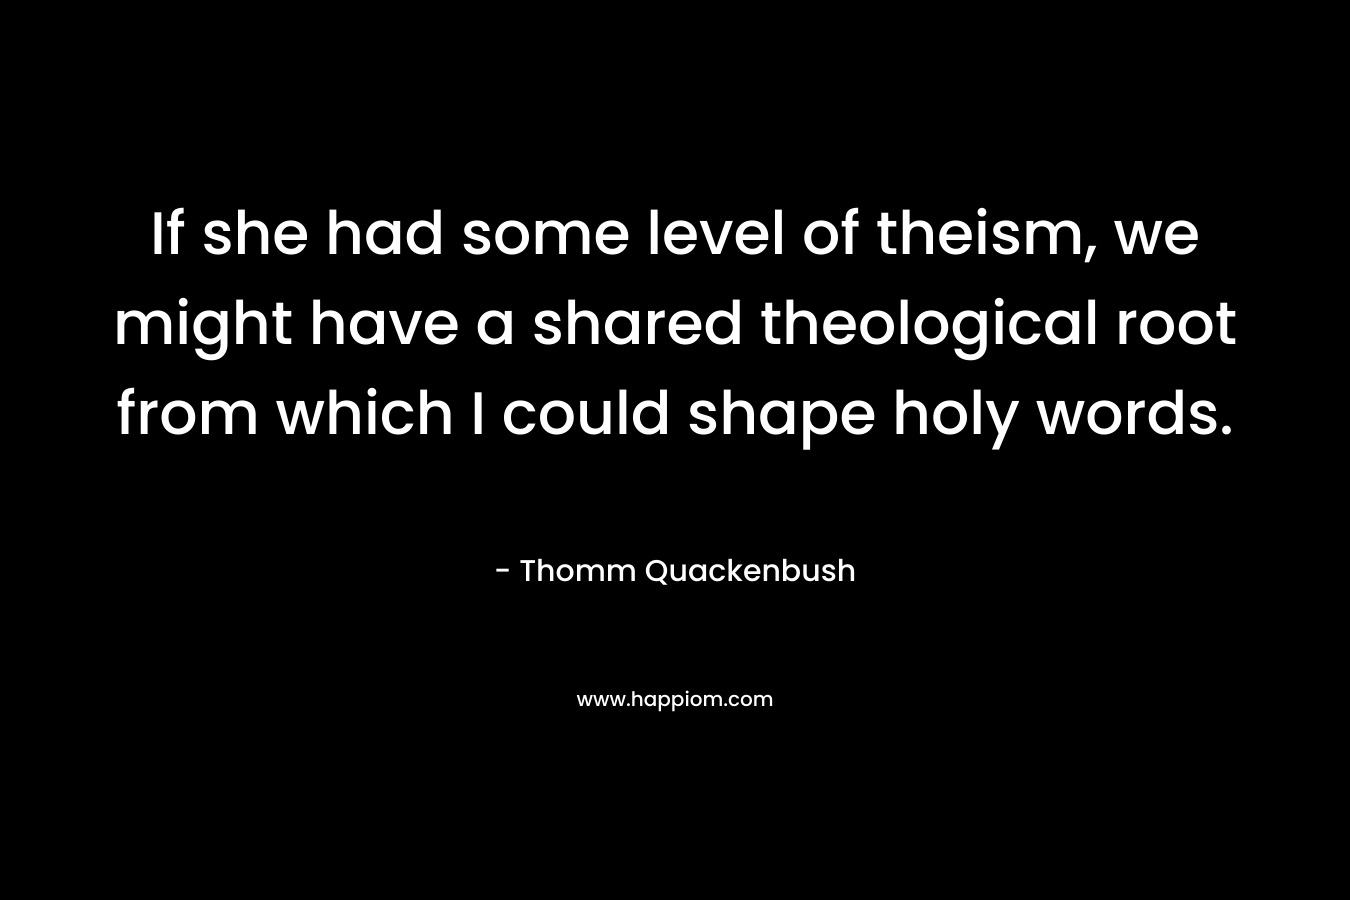 If she had some level of theism, we might have a shared theological root from which I could shape holy words. – Thomm Quackenbush